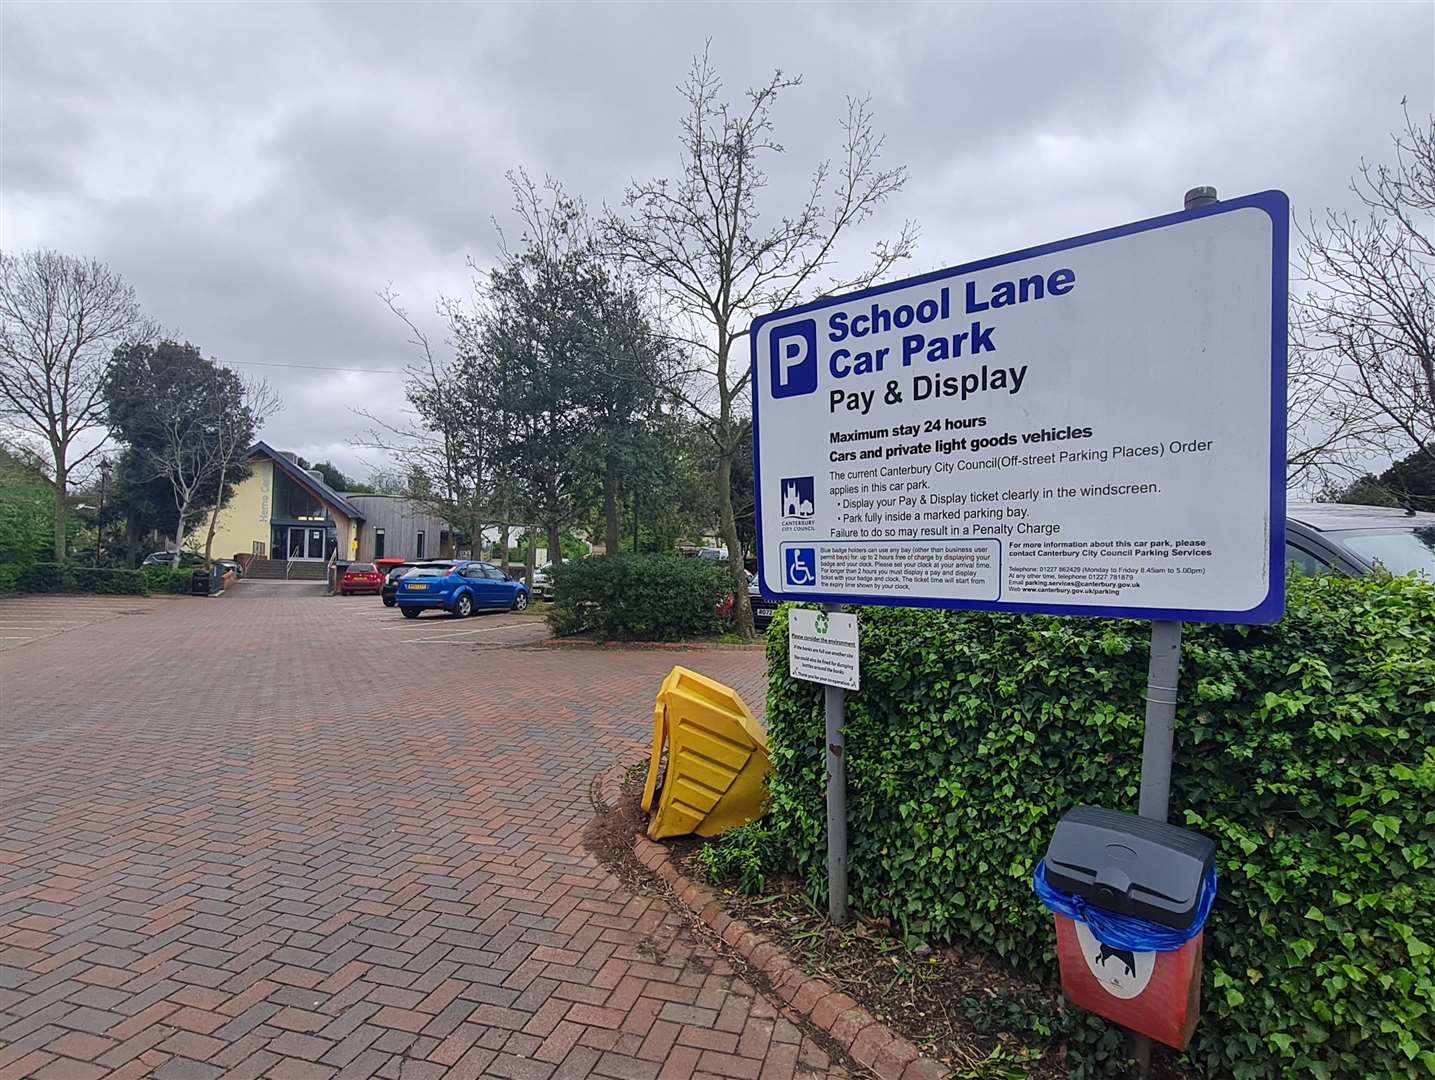 Residents say the car park has been left largely deserted since the new charges were introduced